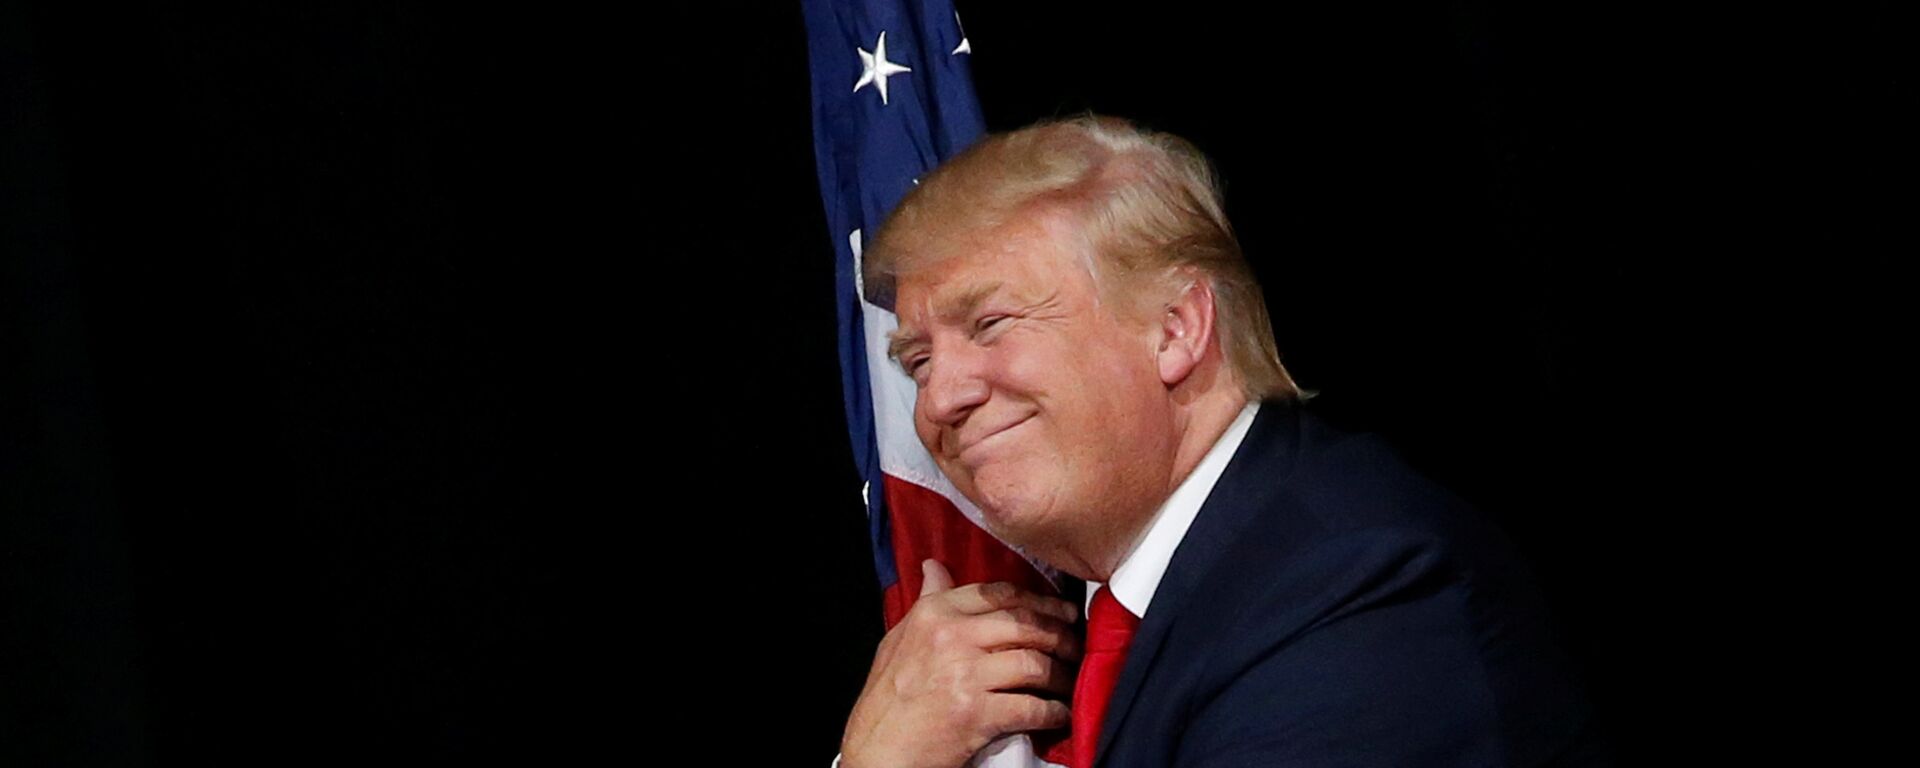   Donald Trump hugs a U.S. flag as he comes onstage to rally with supporters in Tampa, Florida, U.S. October 24, 2016 - Sputnik International, 1920, 12.09.2021